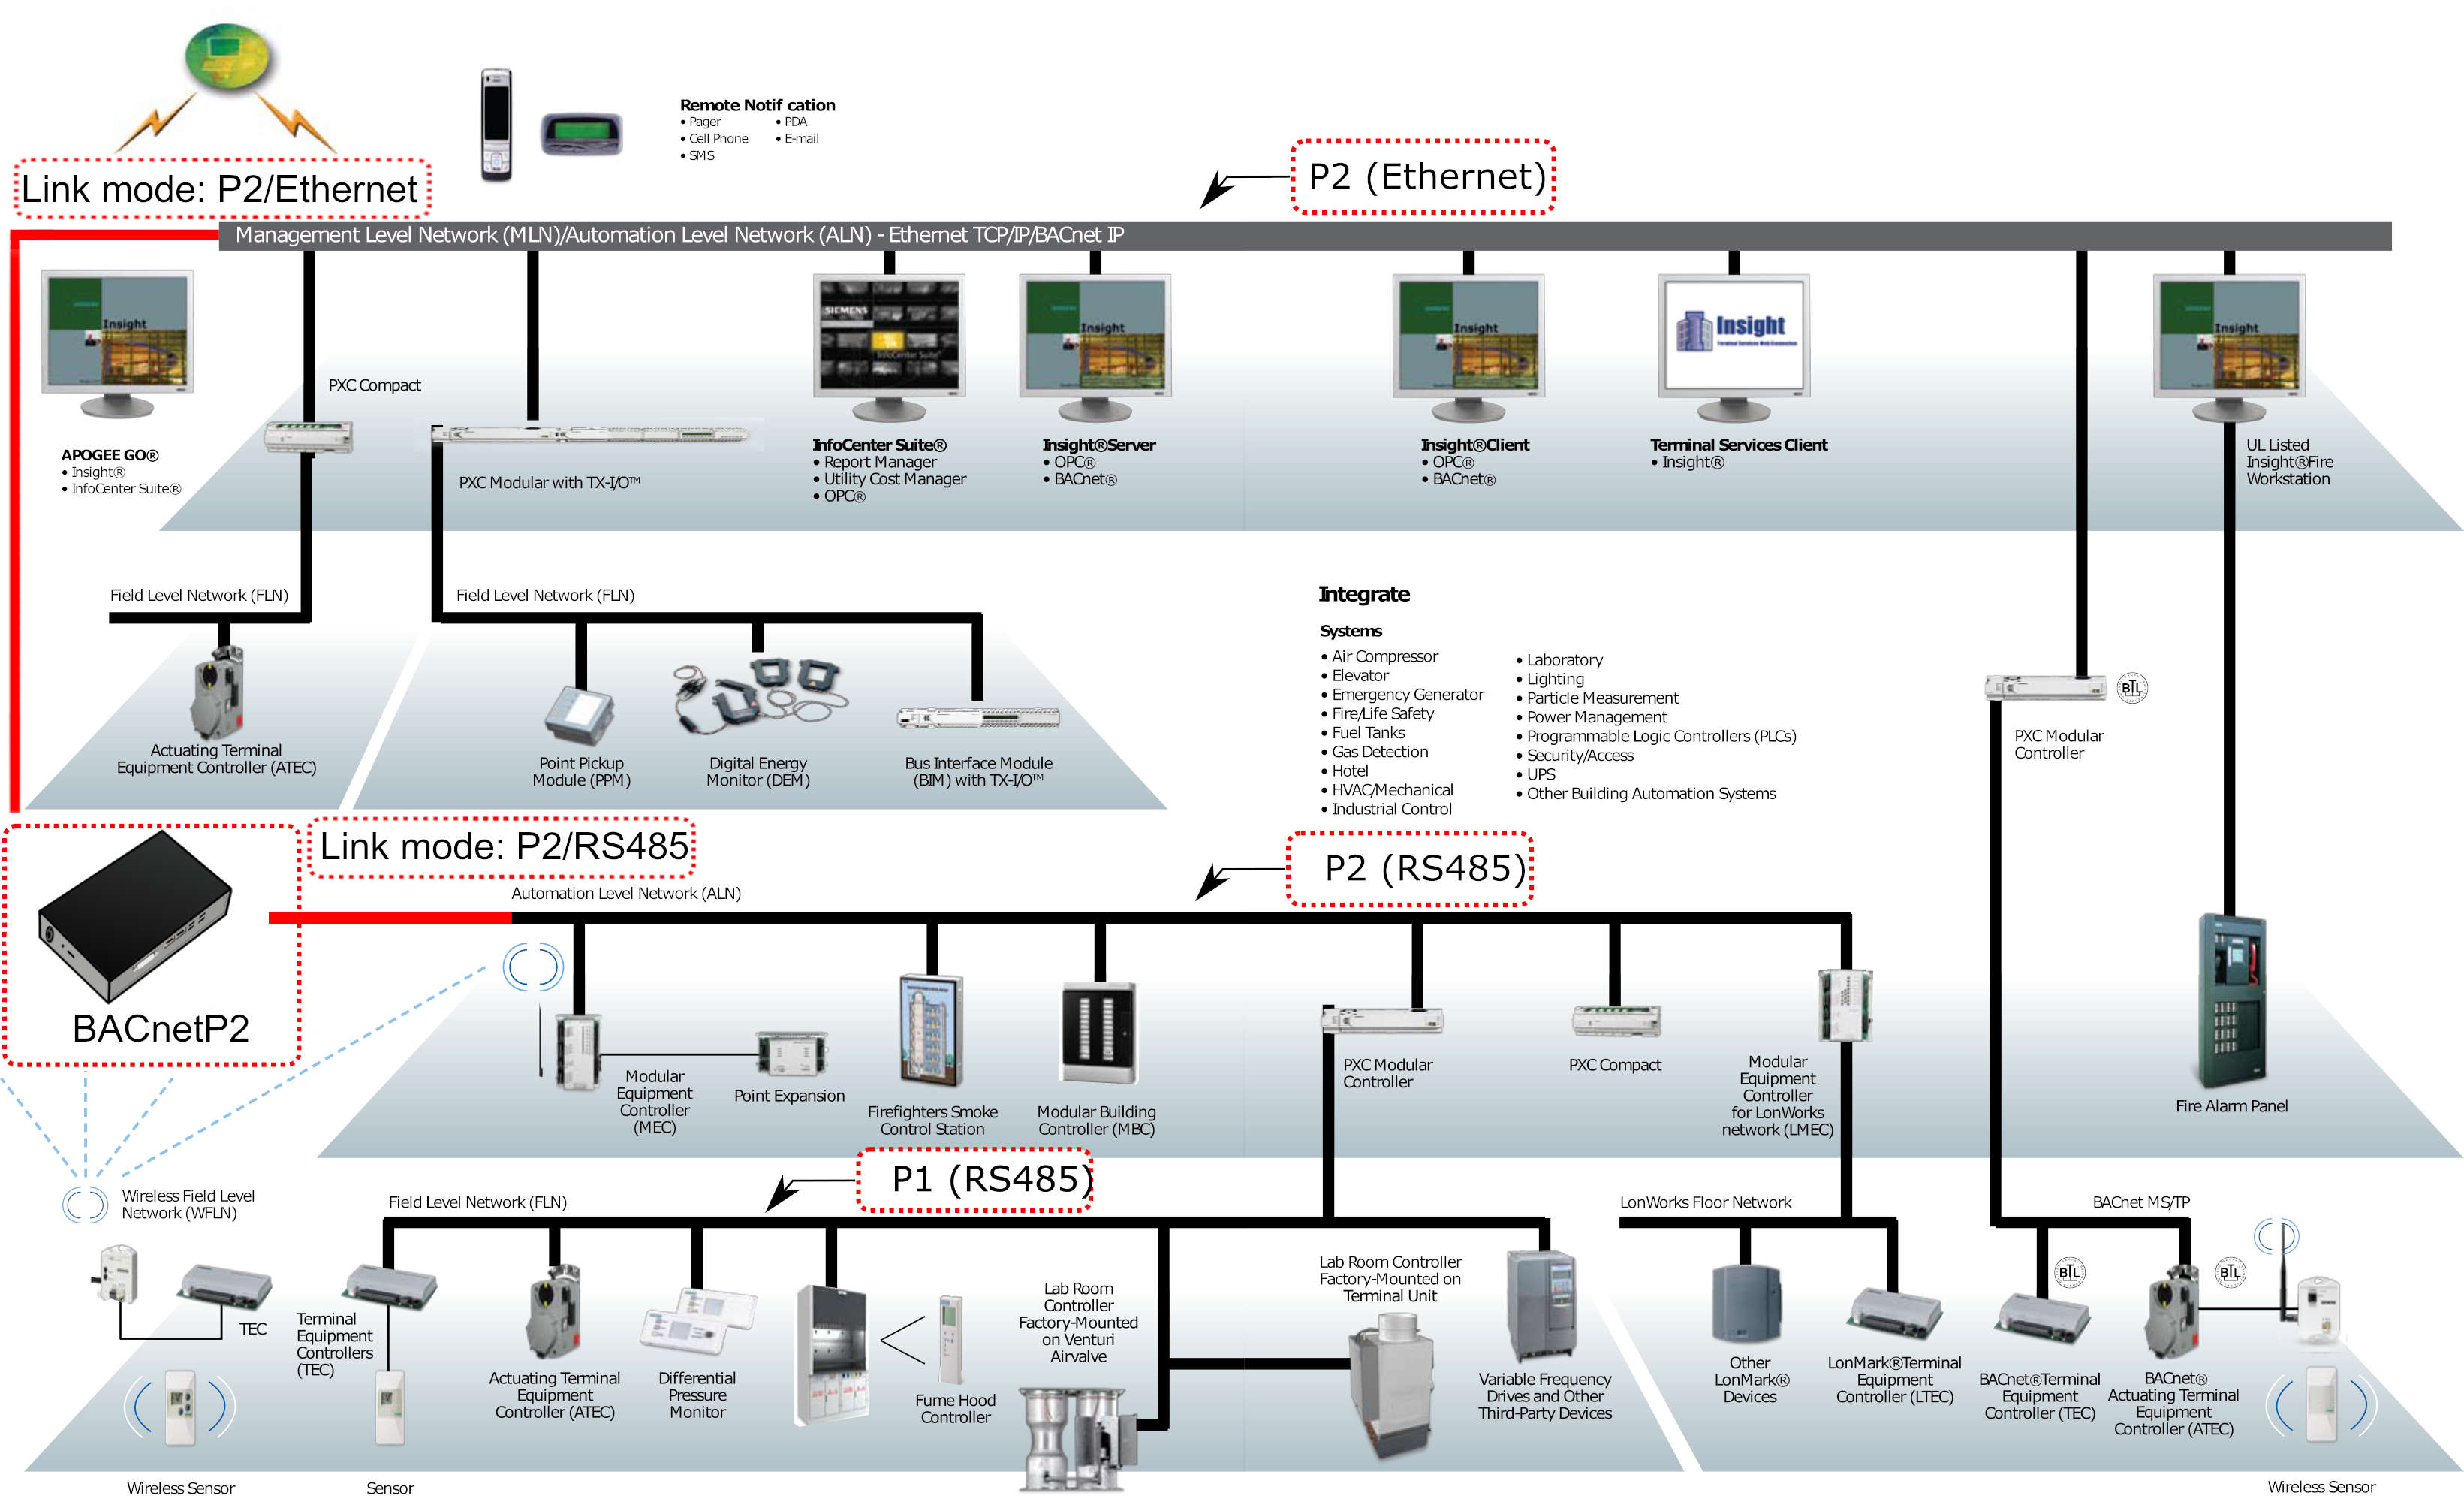 BACnetP2 integration with Siemens Systems